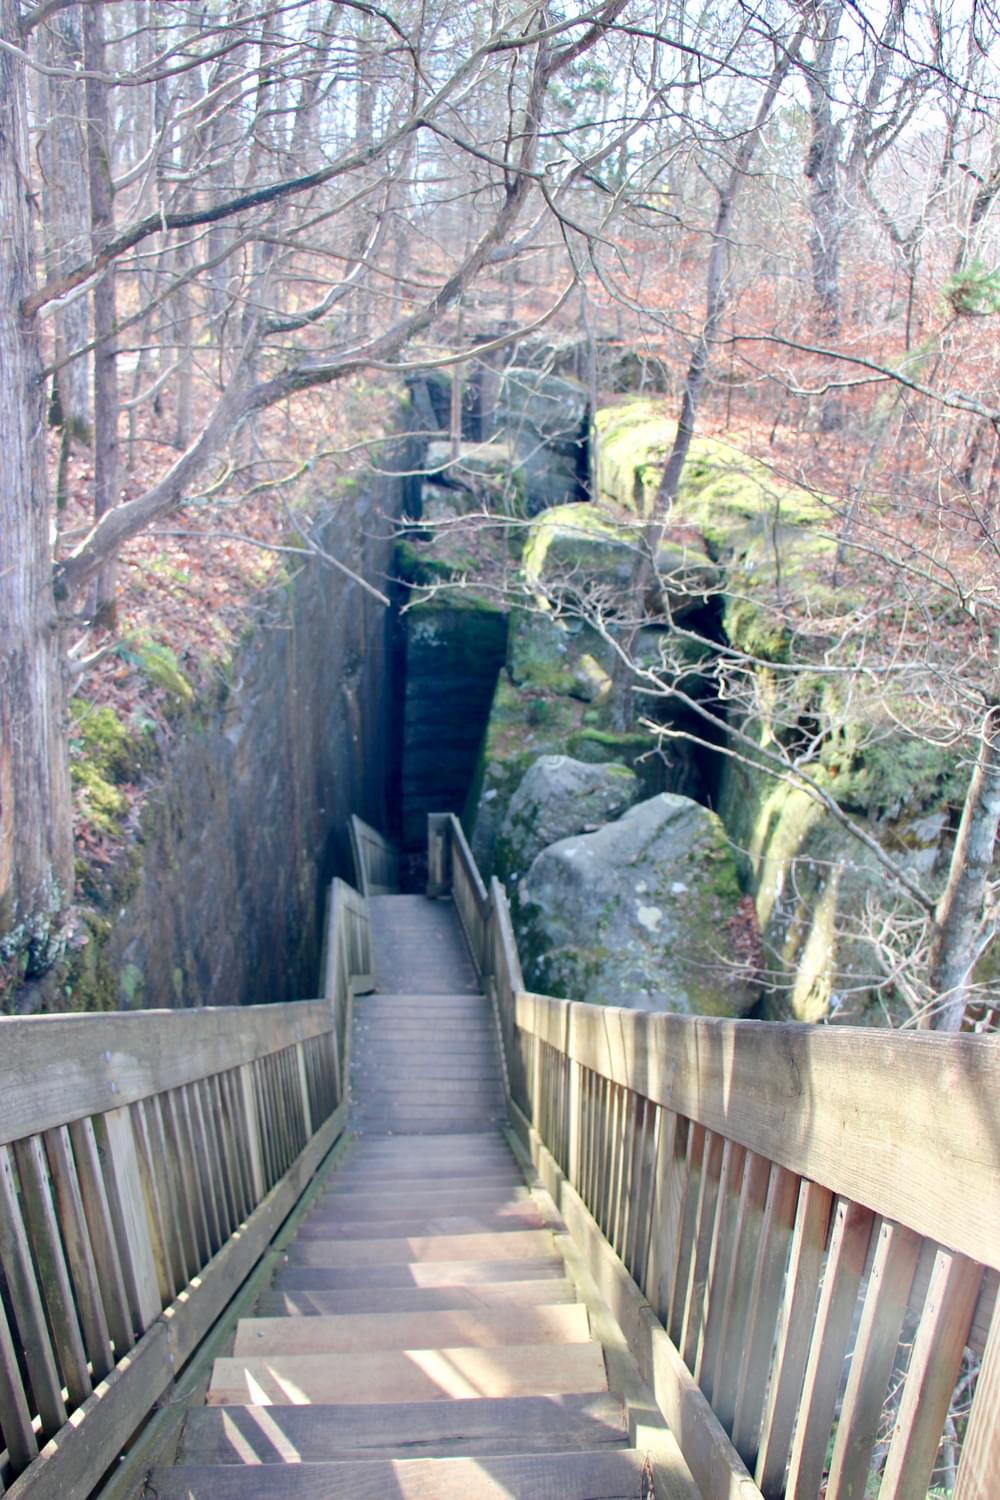 Stairs to lower trail